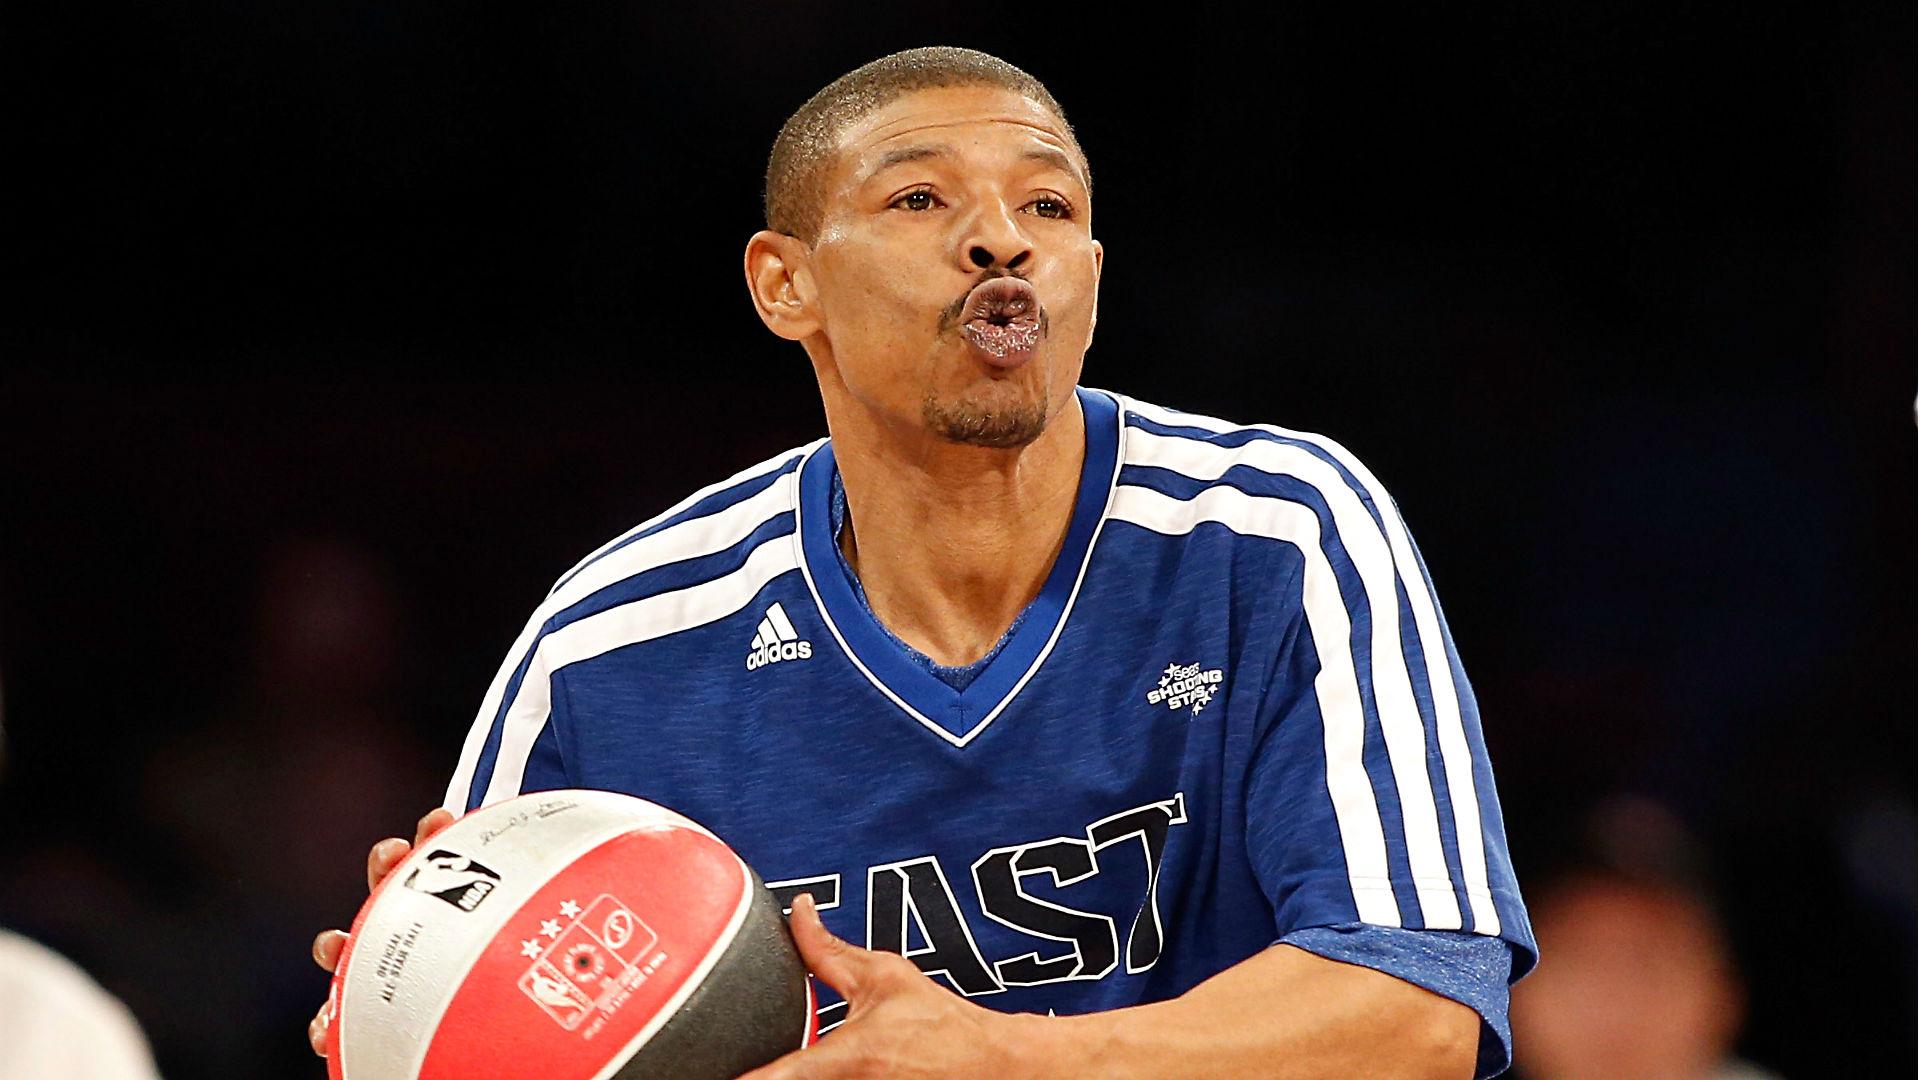 Muggsy Bogues made it out of Baltimore but worries about its